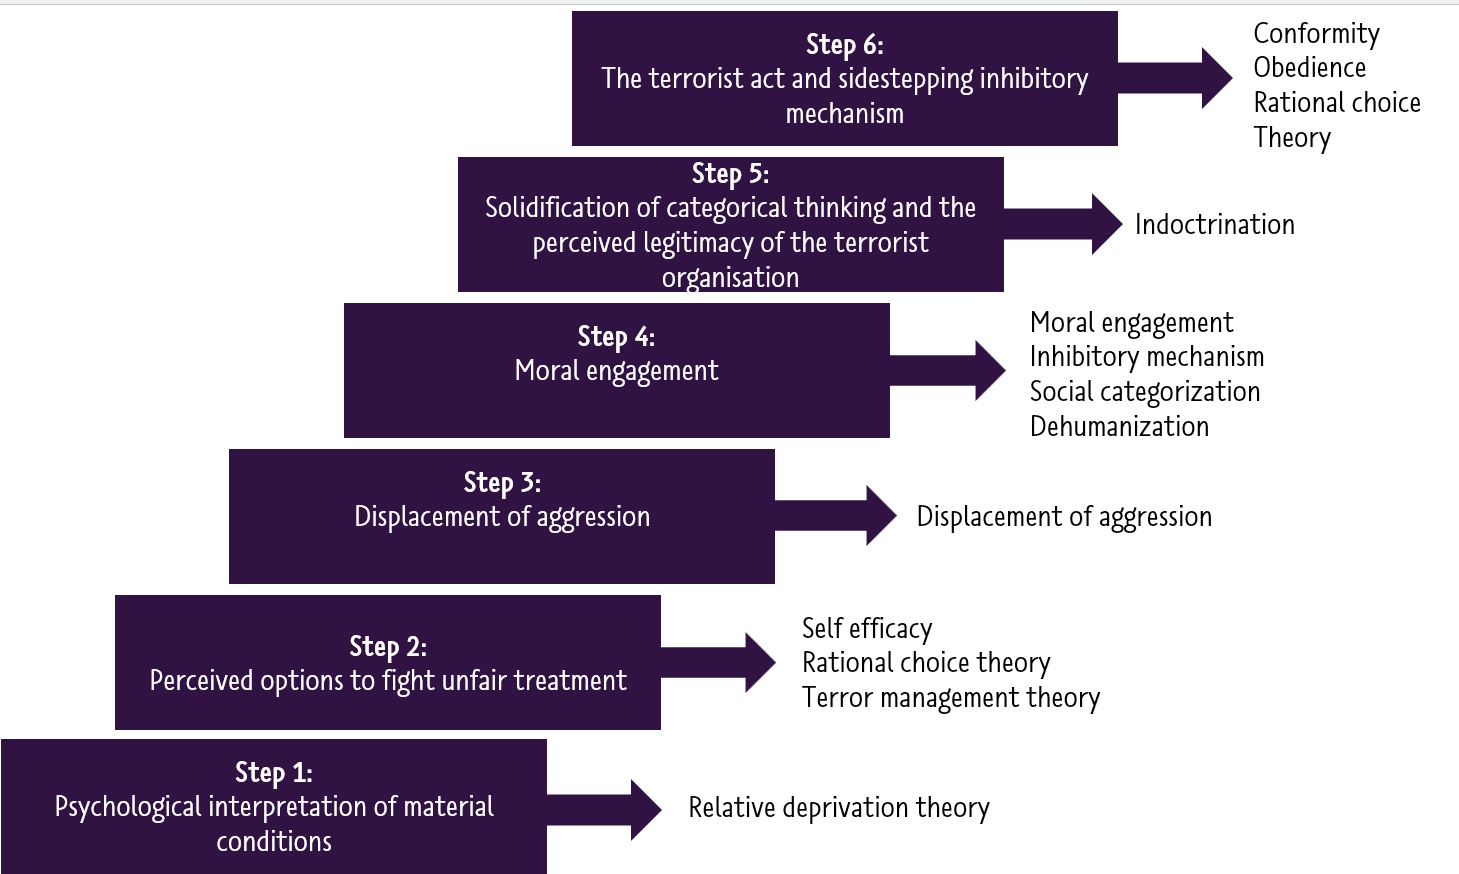 An illustration of Moghaddam’s Staircase to Terrorism with proposed processes and theories on each step. 